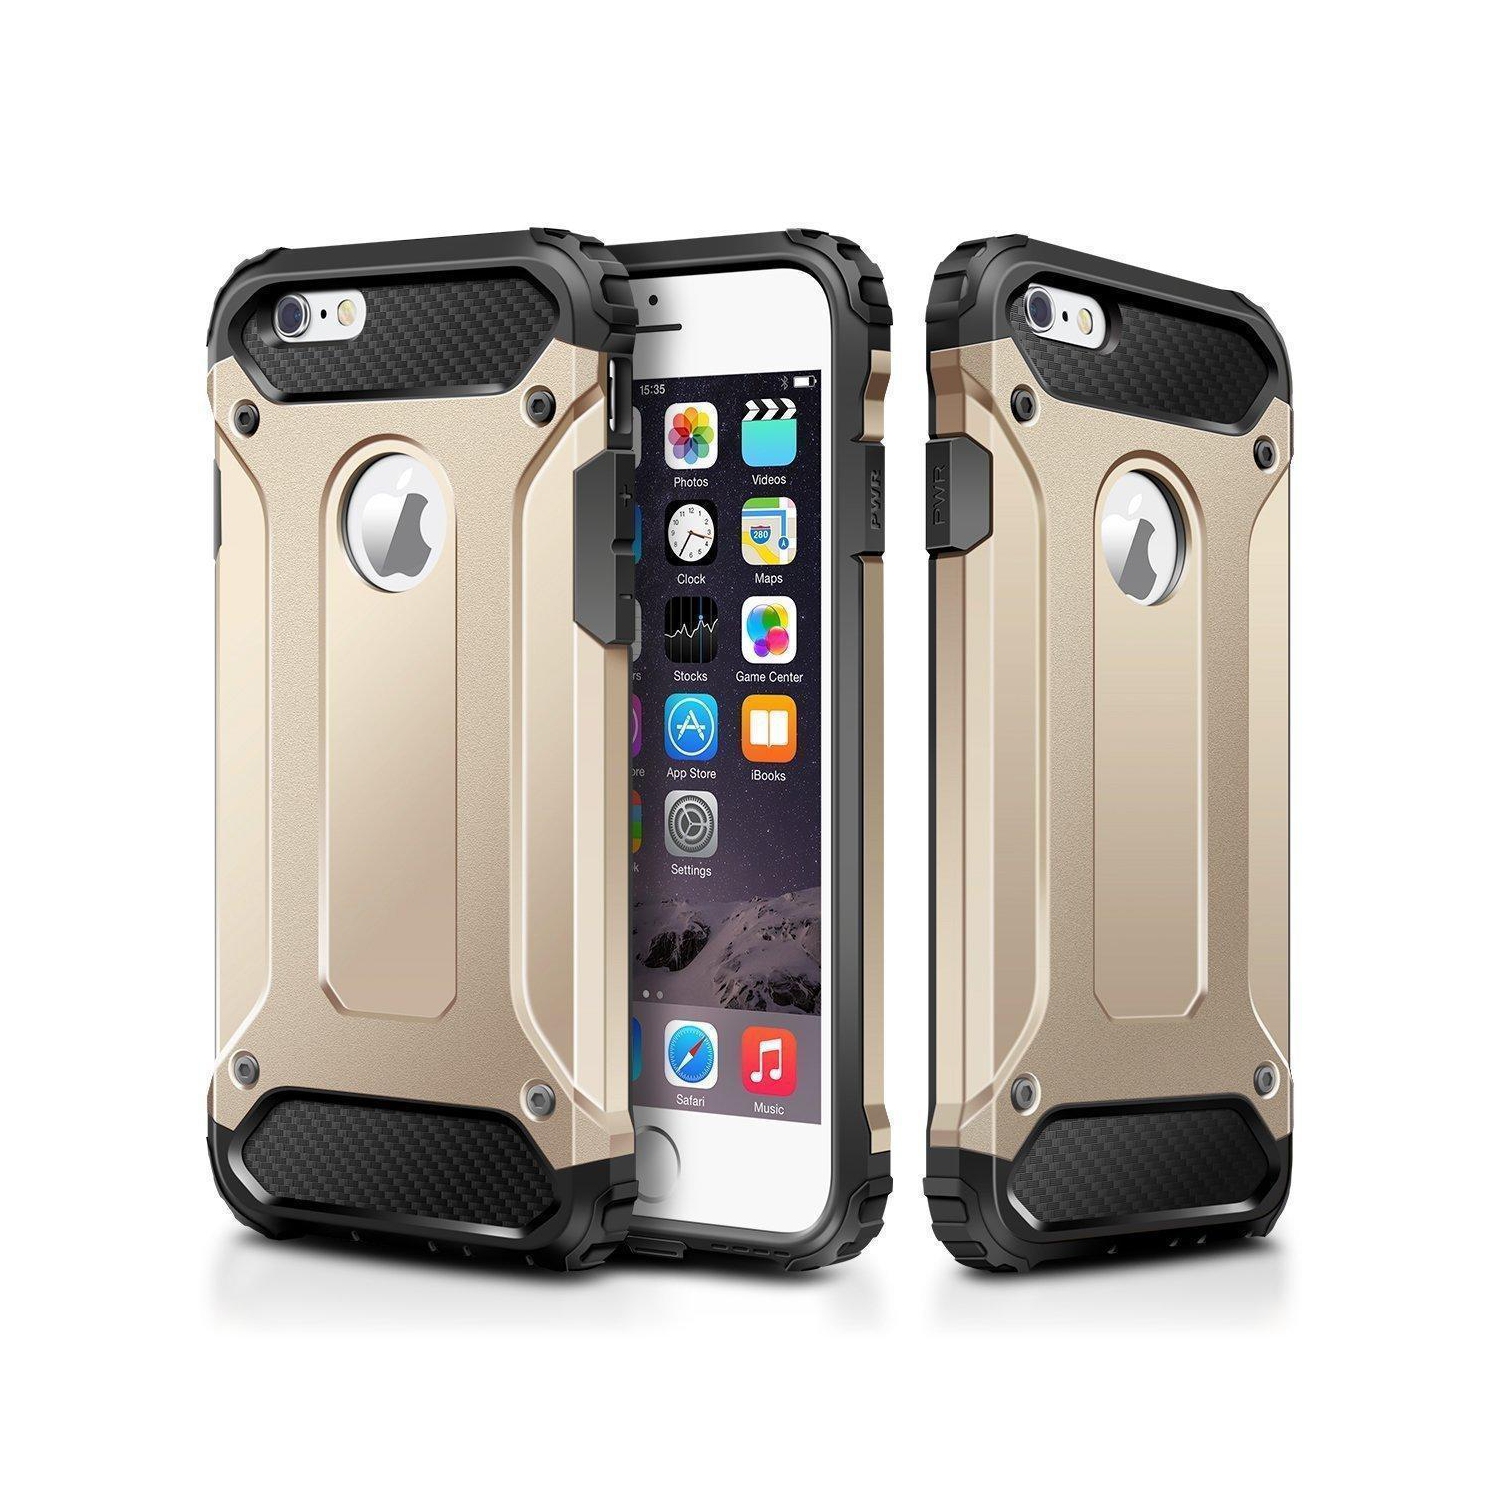 Hybrid Armor Shockproof Rugged Bumper Case For Apple iPhone 6 Plus / 6s Plus (Gold)